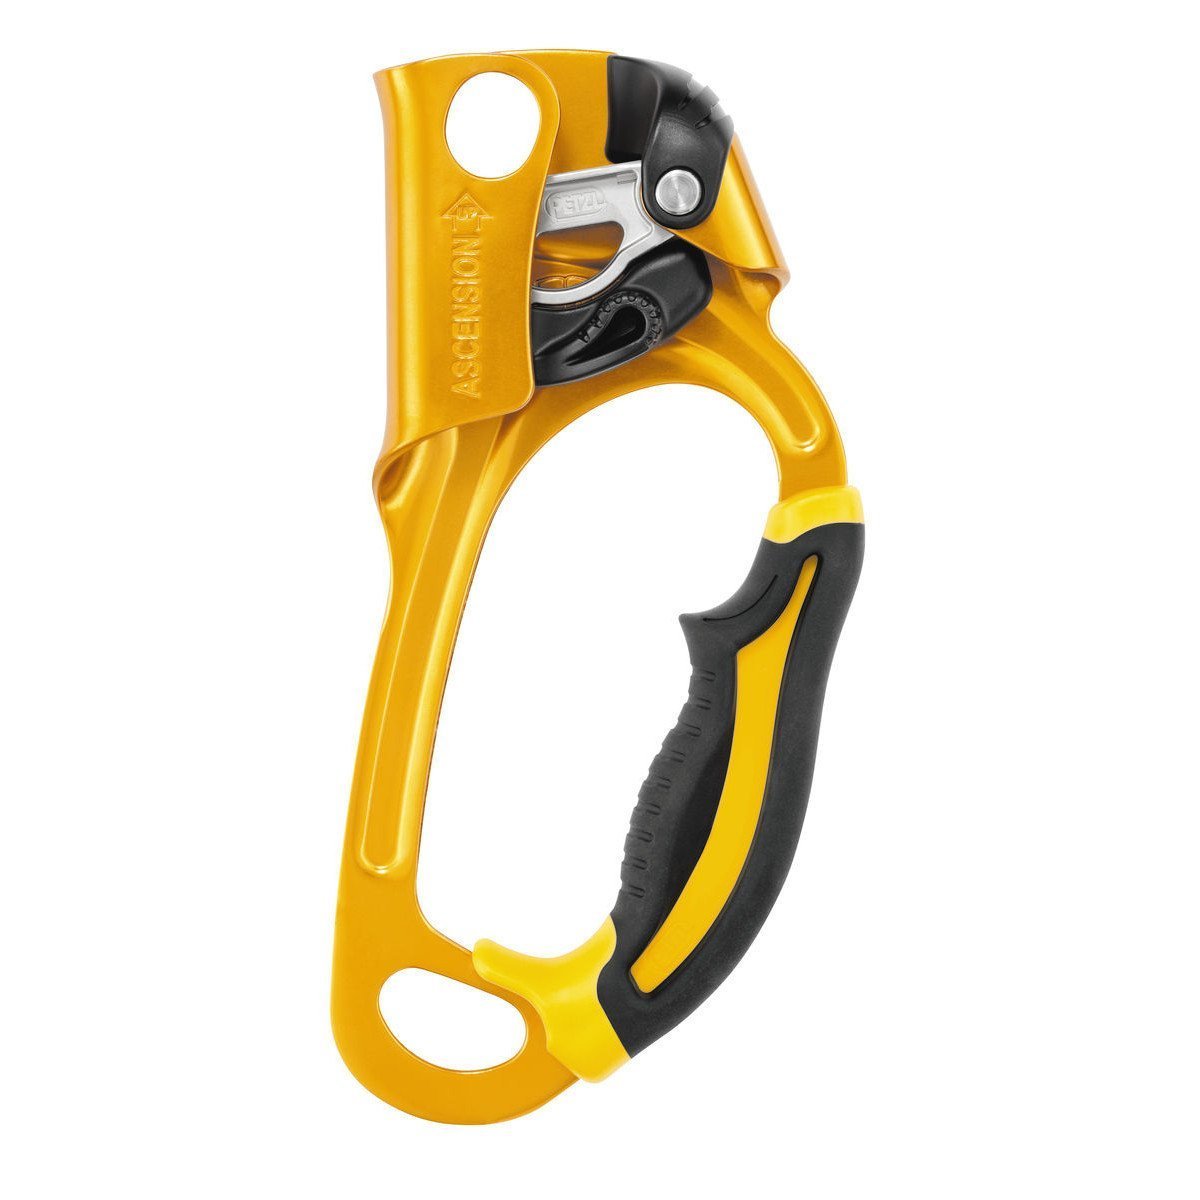 Climbing Equipment, Ascender Harness Rope Carabiner and More